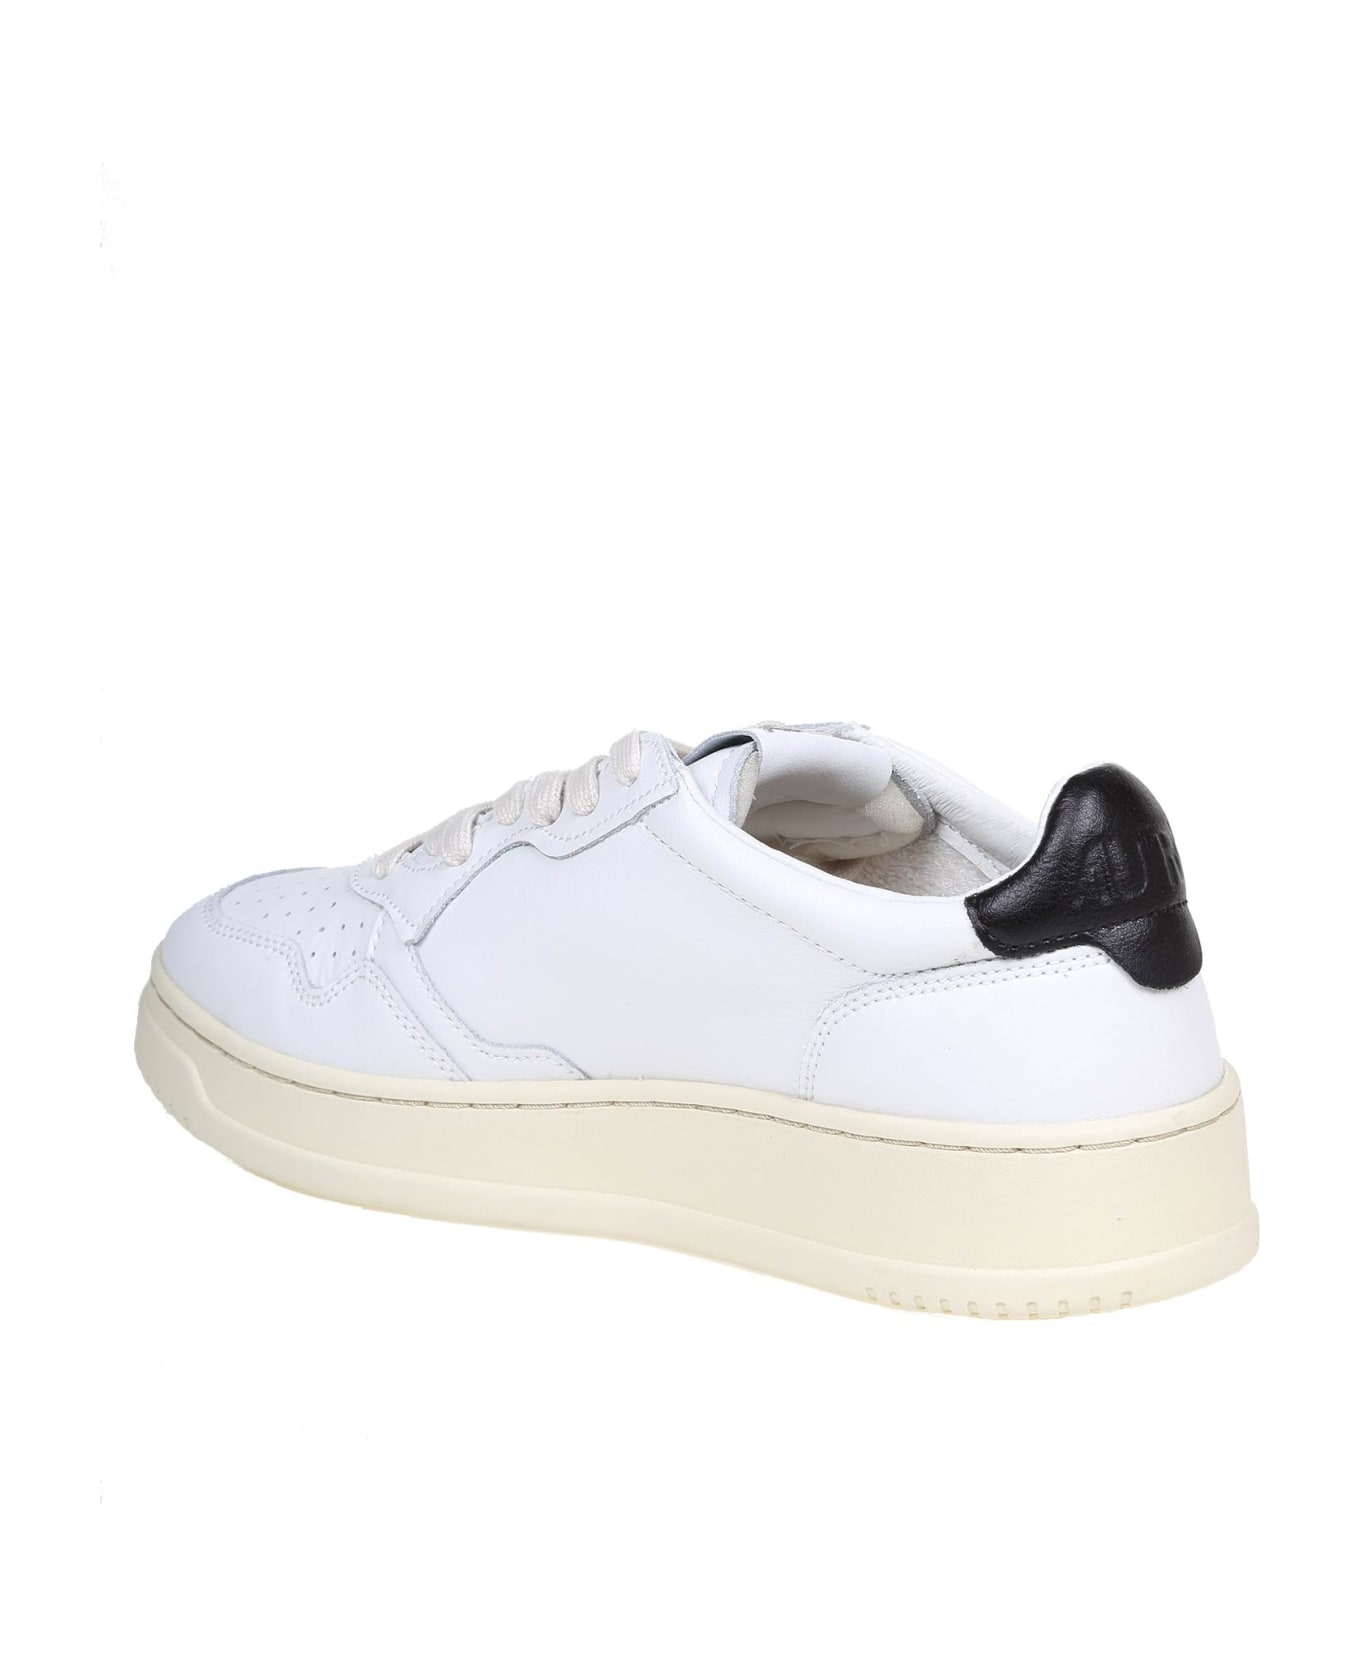 Autry Black And White Leather Sneakers - White/Black